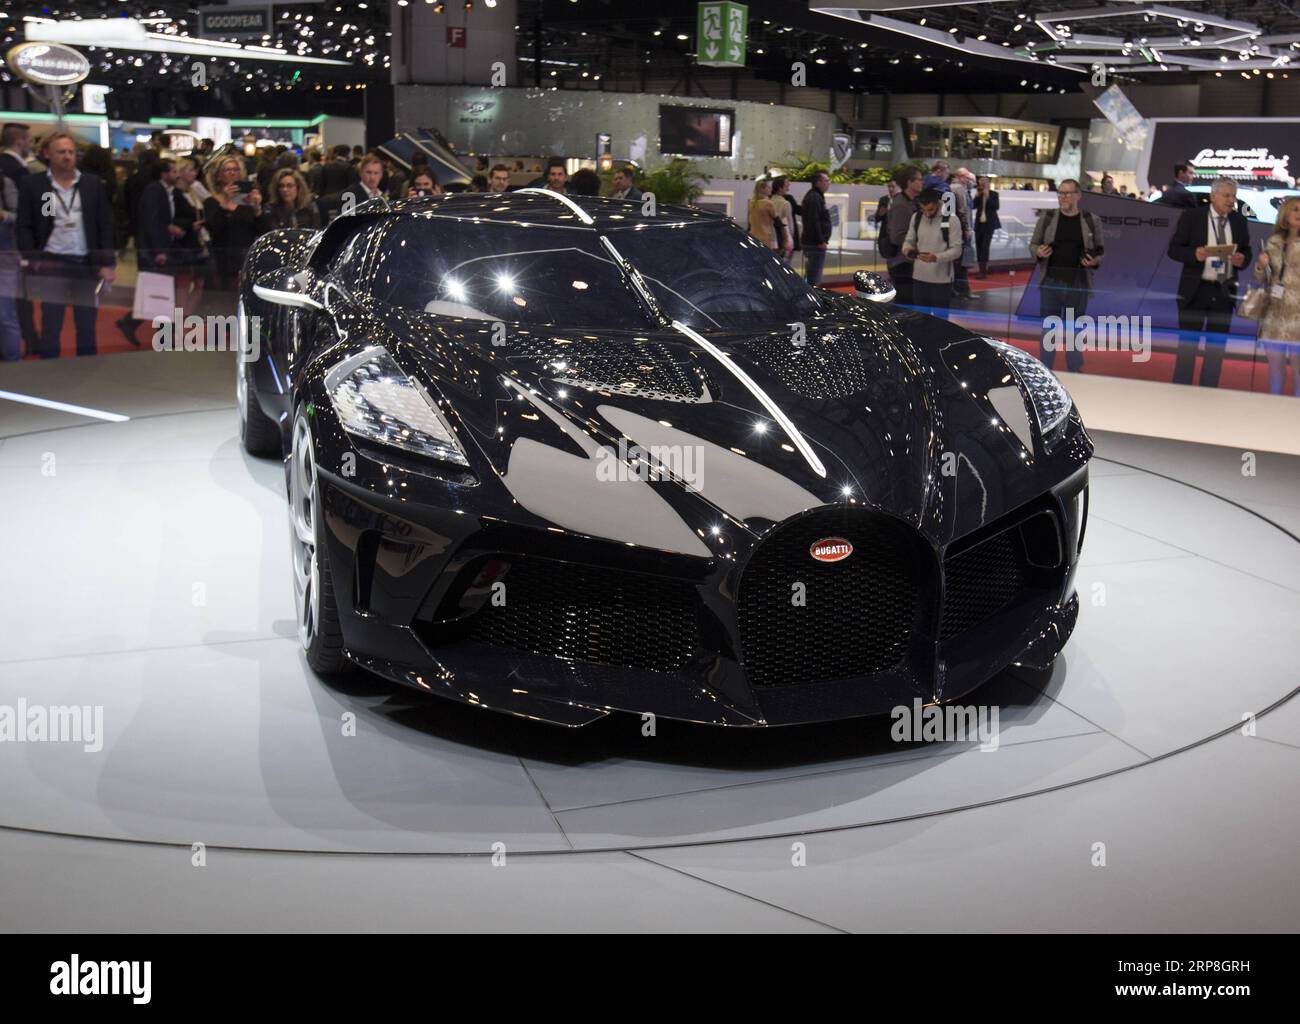 The Bugatti “La Voiture Noire” is the most expensive new car in the world, British GQ